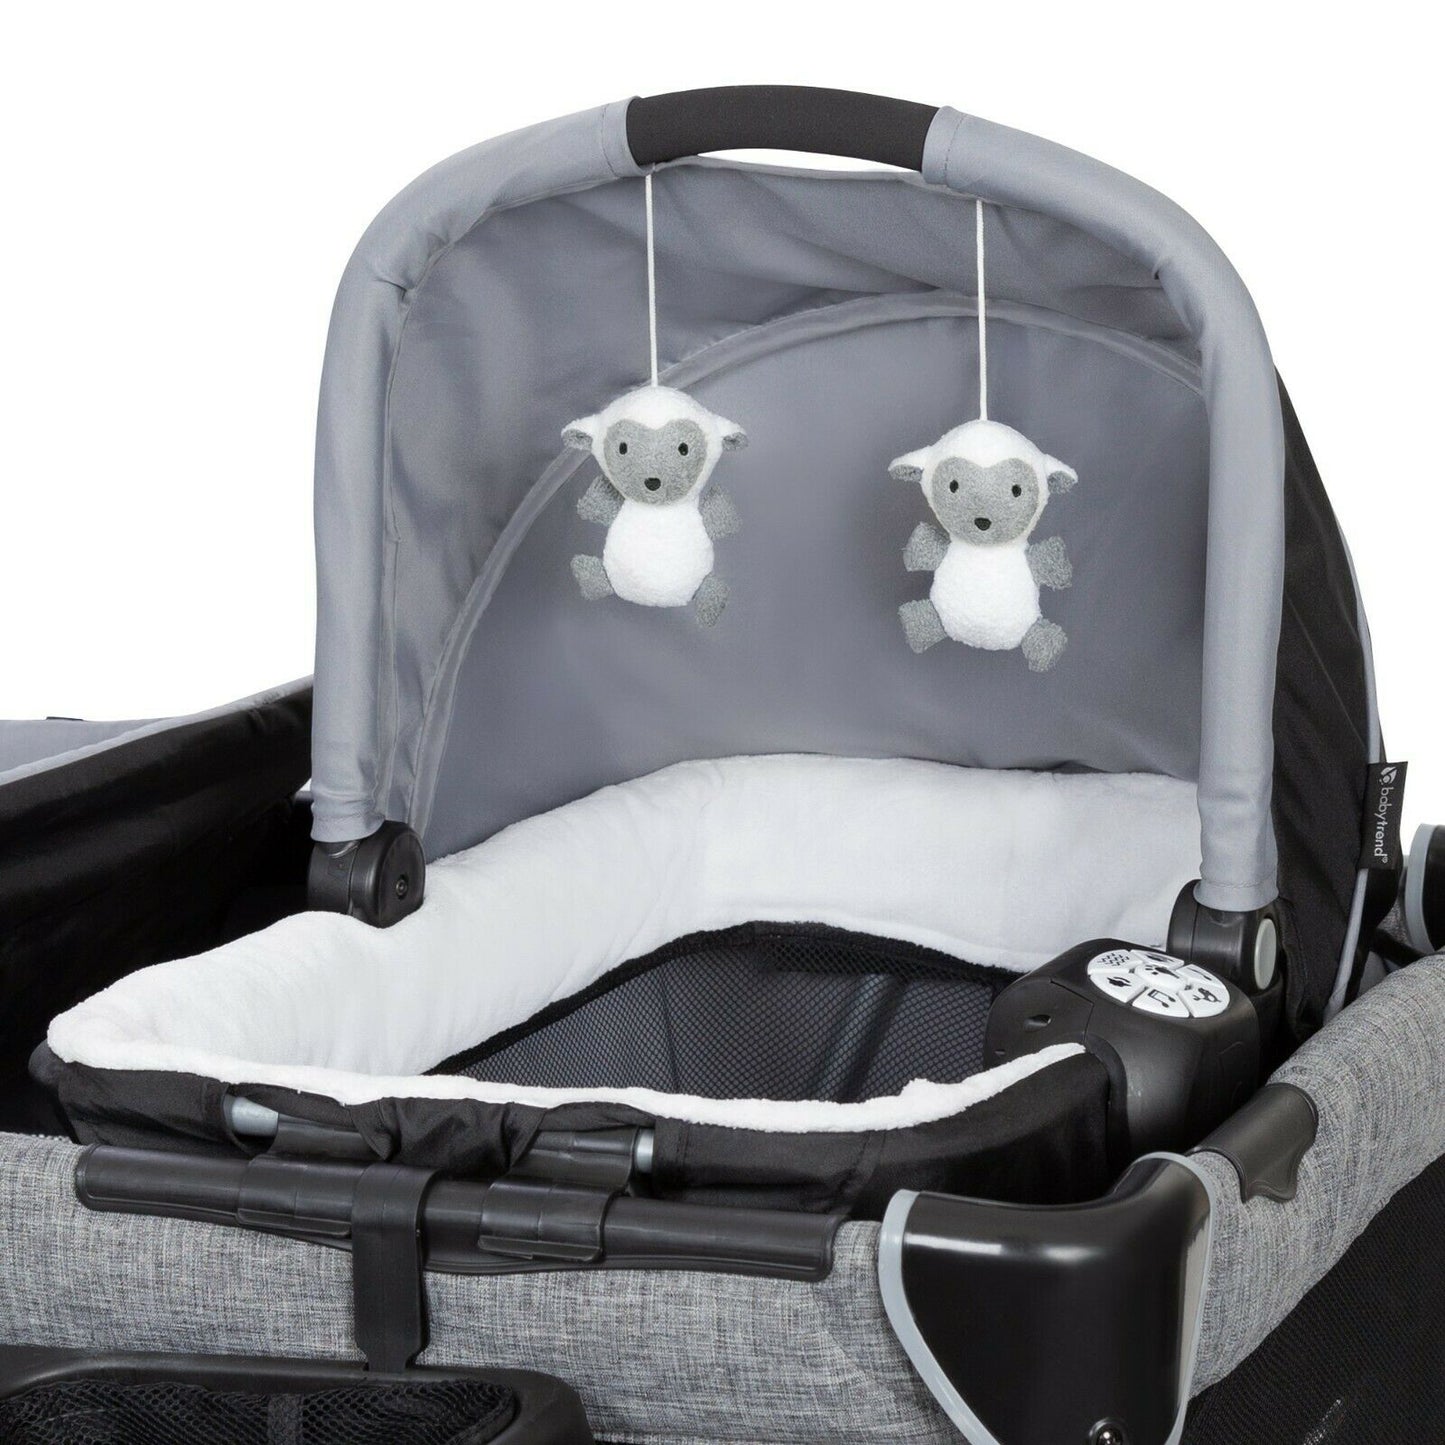 New Baby Stroller Travel System with Car Seat Playard Crib Jogging Combo